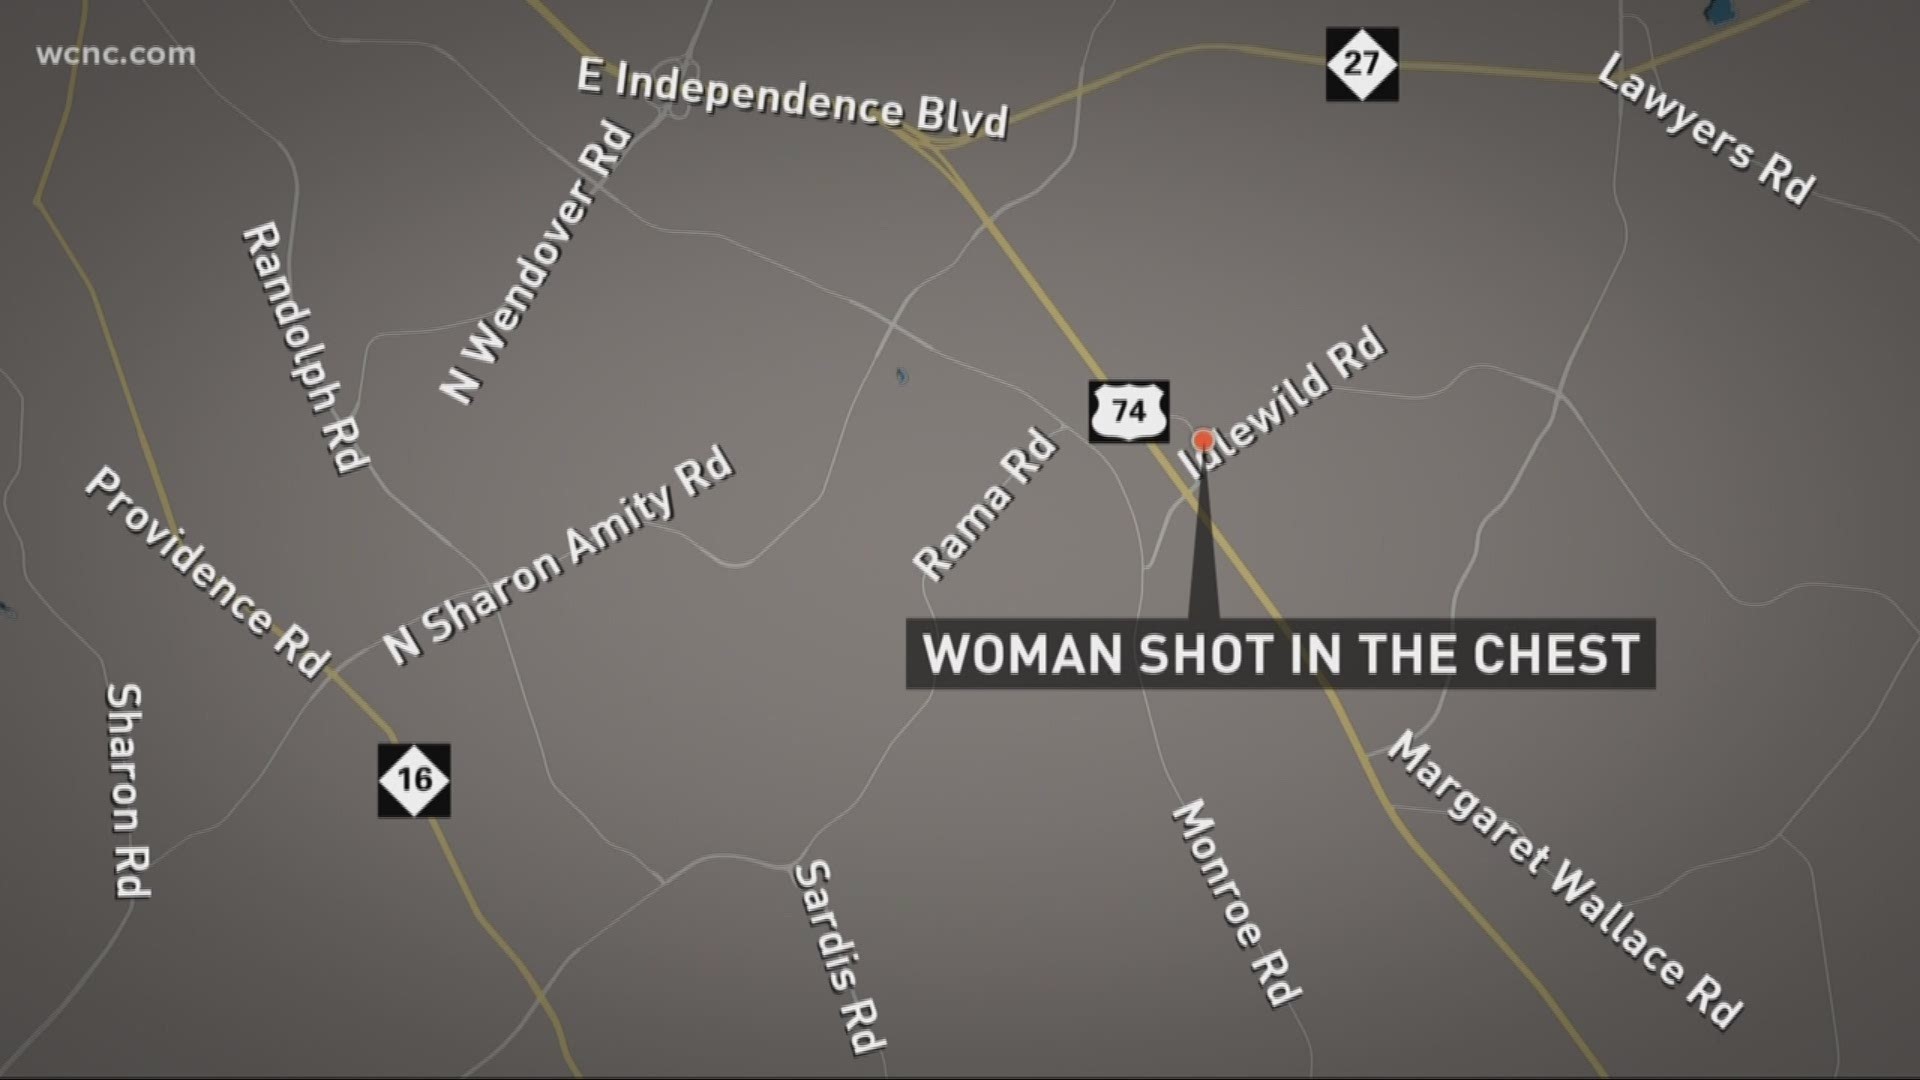 CMPD is investigating after a woman was shot in east Charlotte early Tuesday.